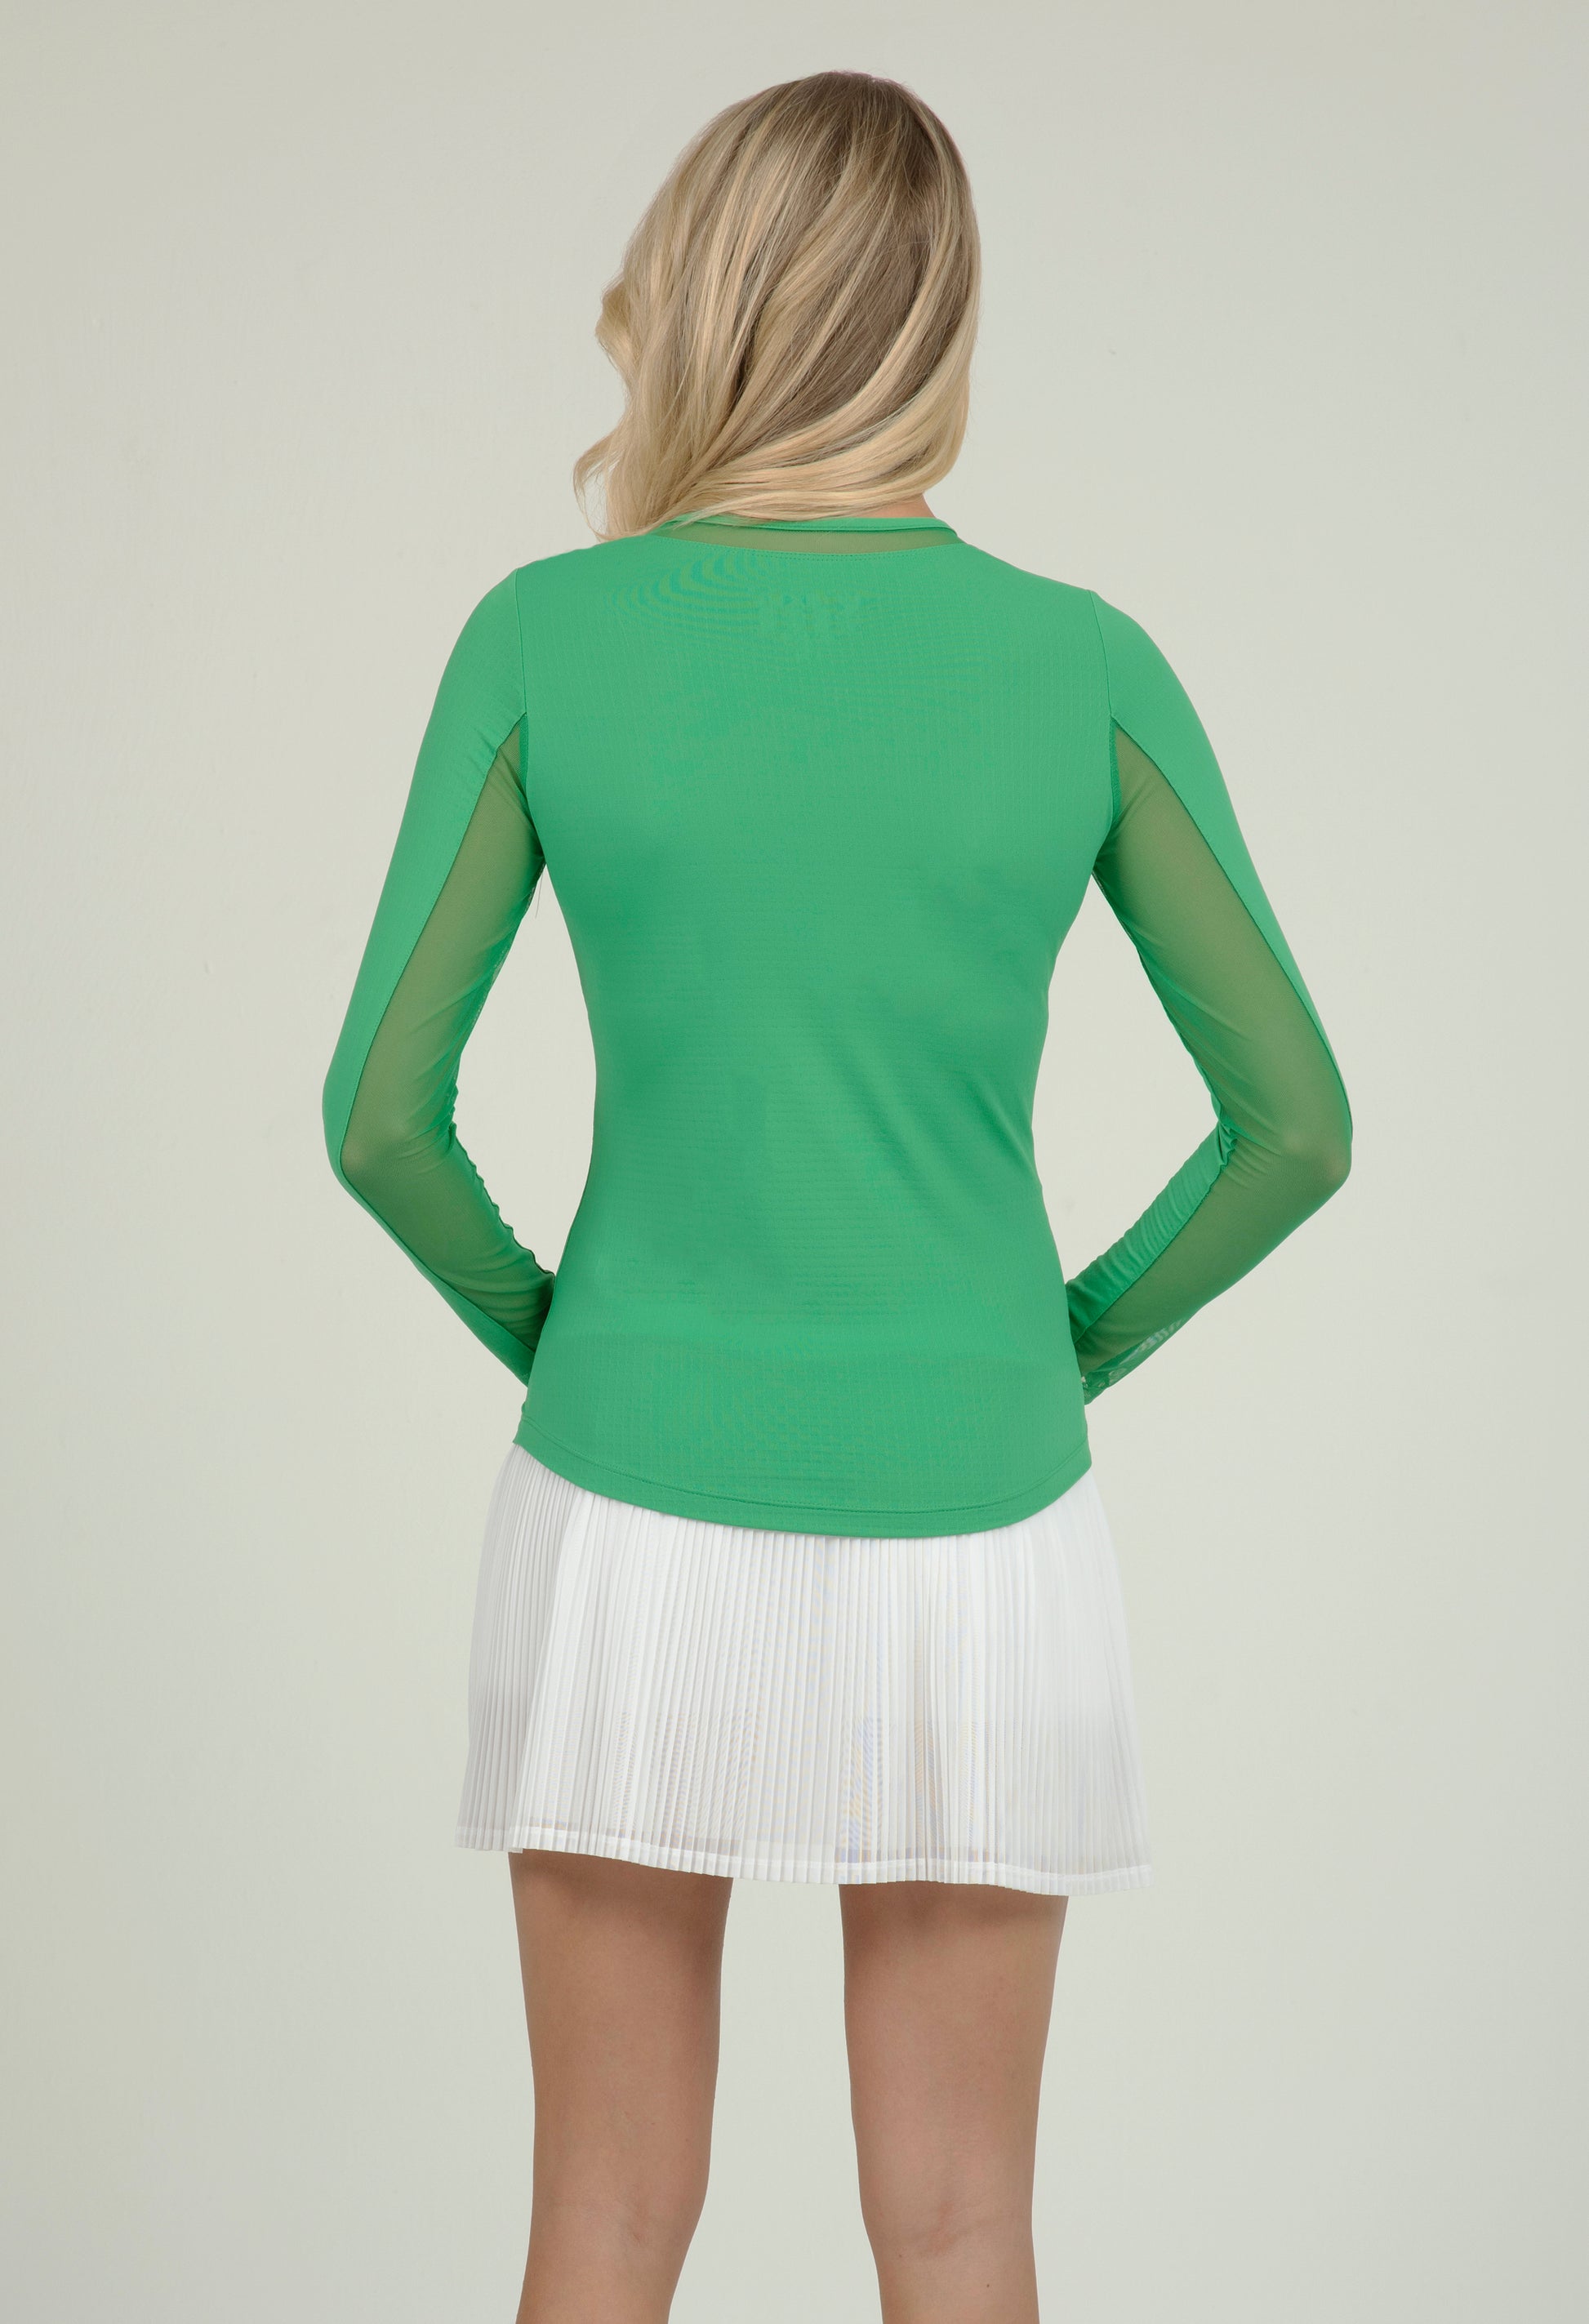 IBKÜL - Long Sleeve Crew Neck with Mesh - 83000 - Color: Green